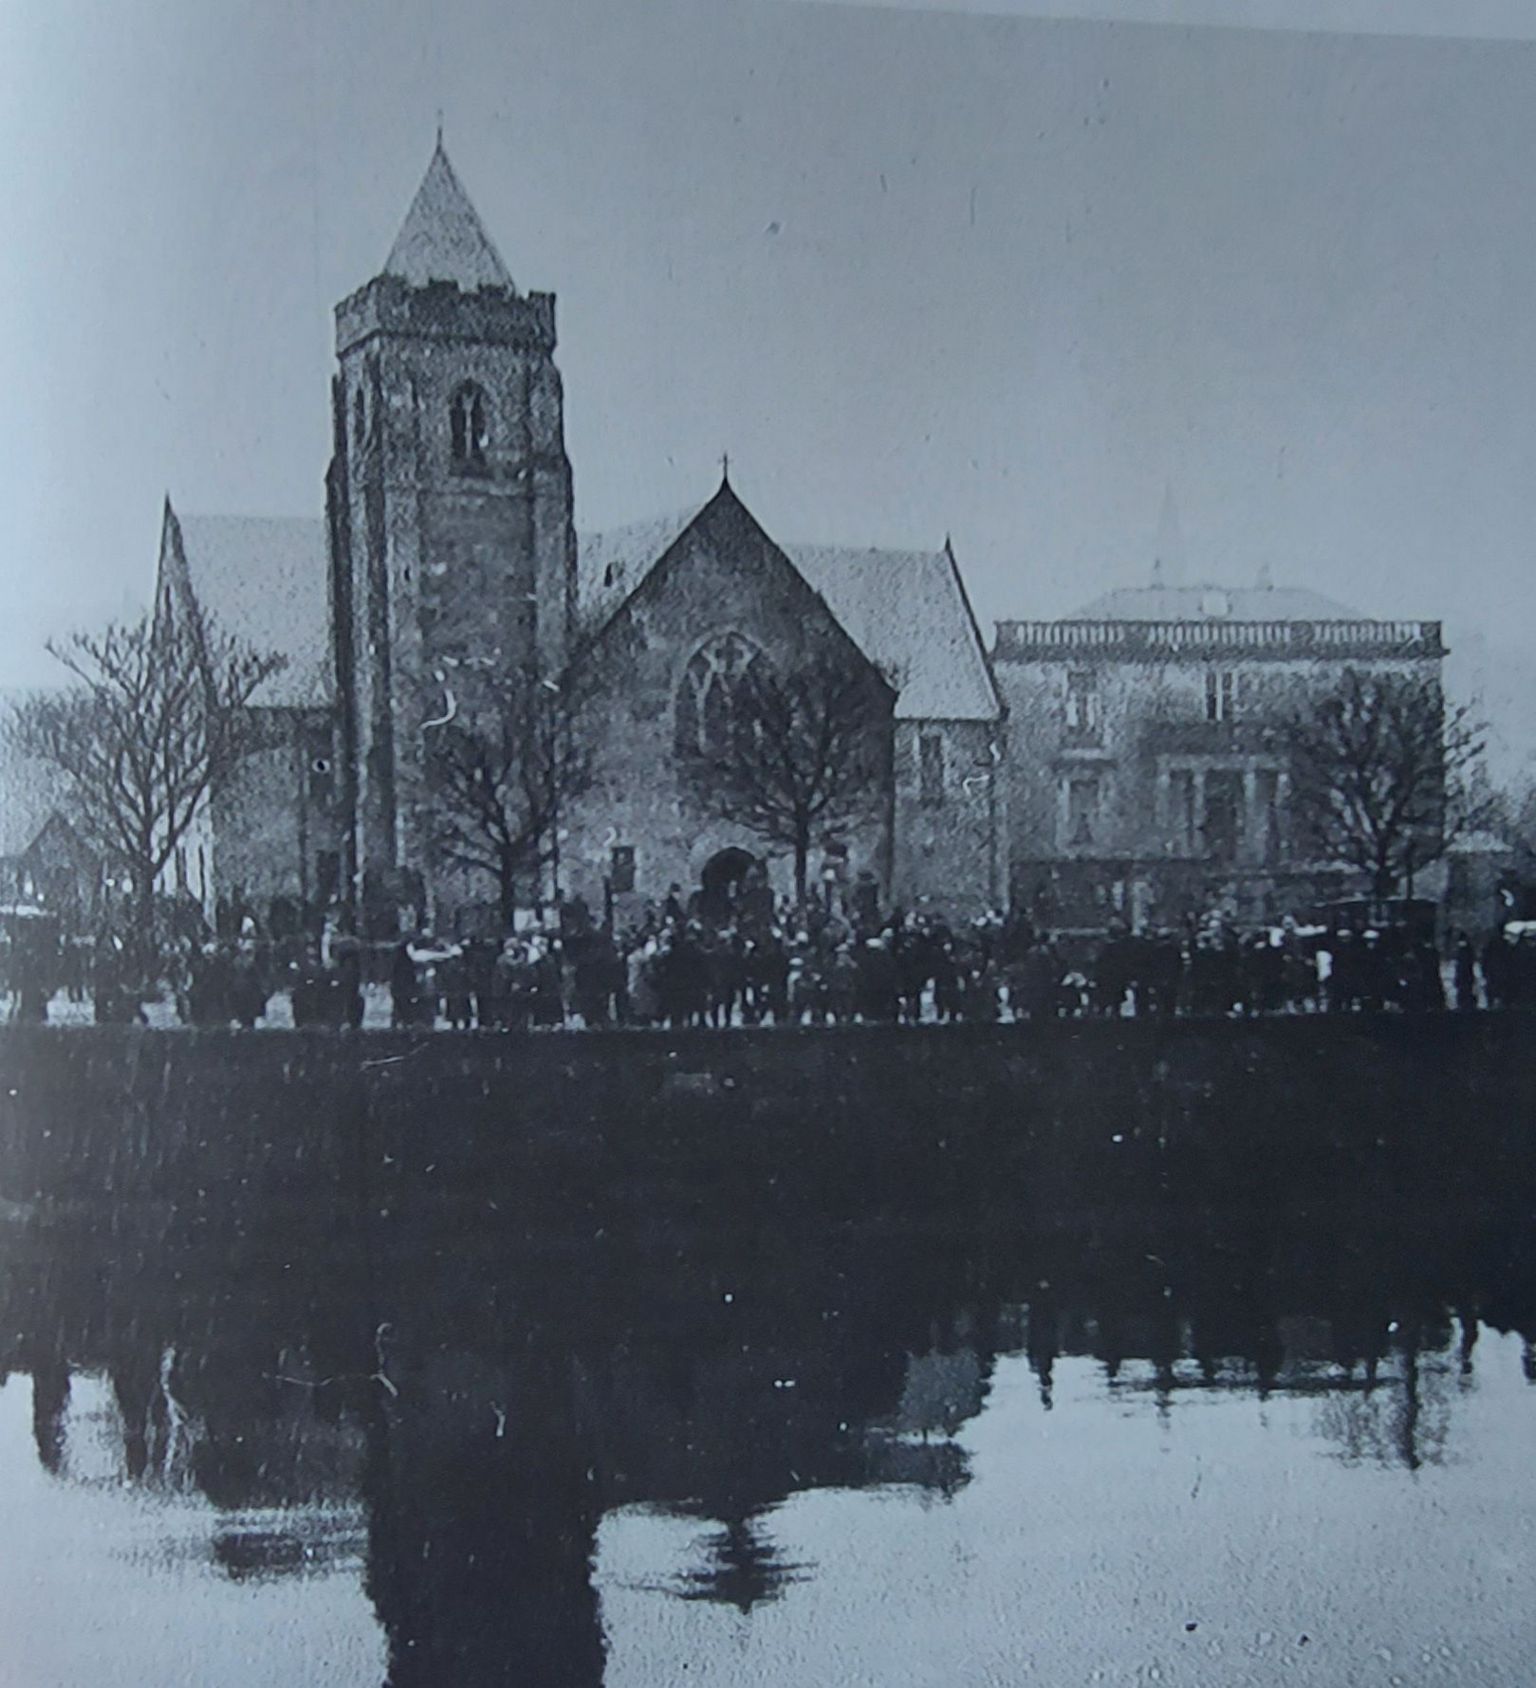 The church in its new and current site at Greenocks esplanade with a crowd gathered